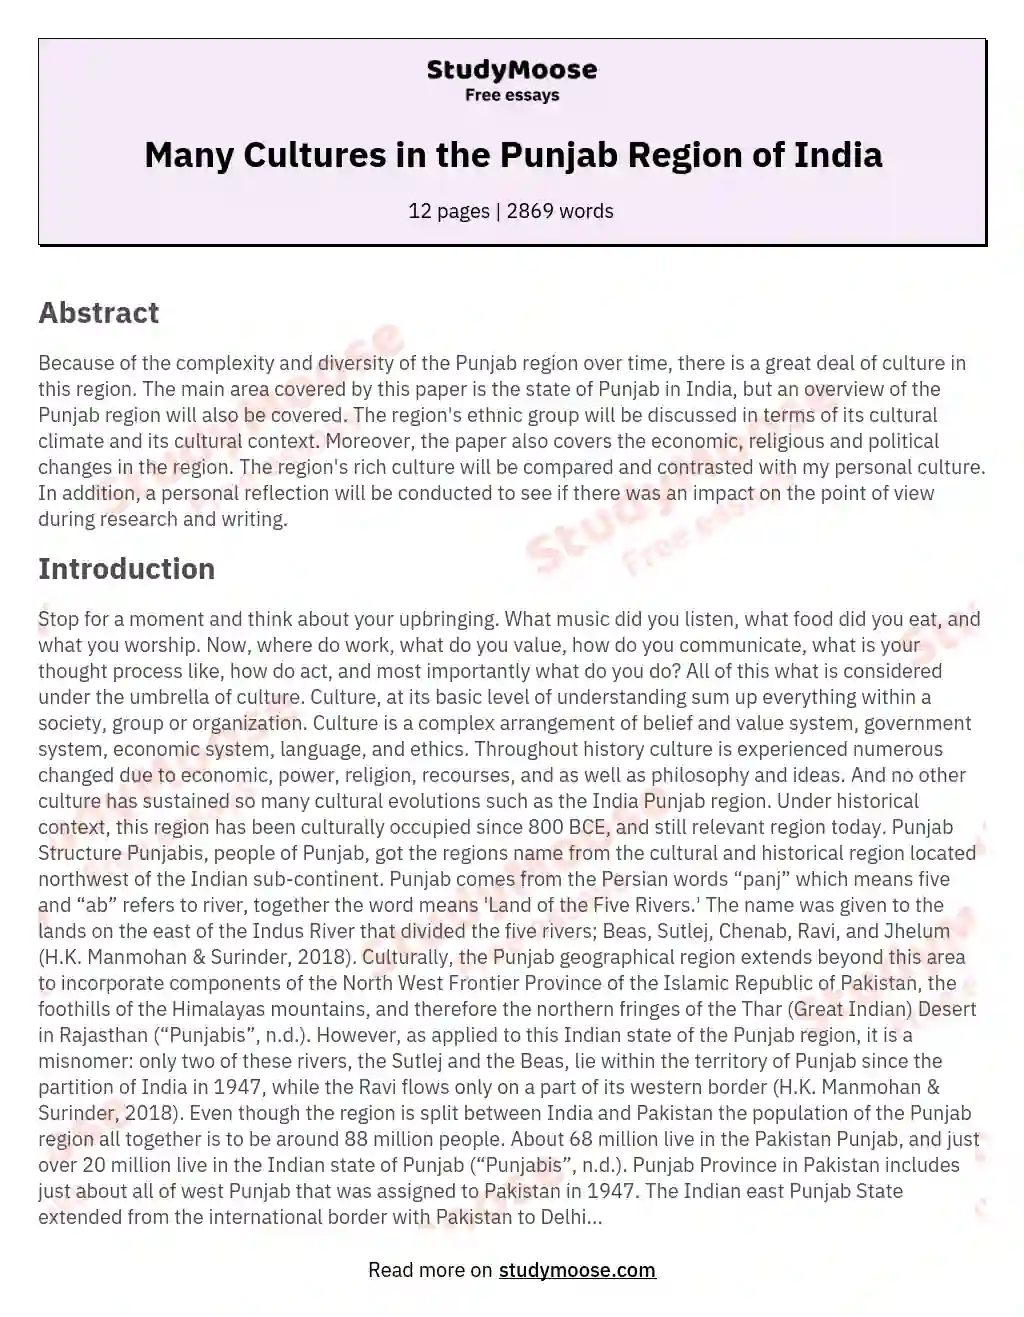 Many Cultures in the Punjab Region of India essay